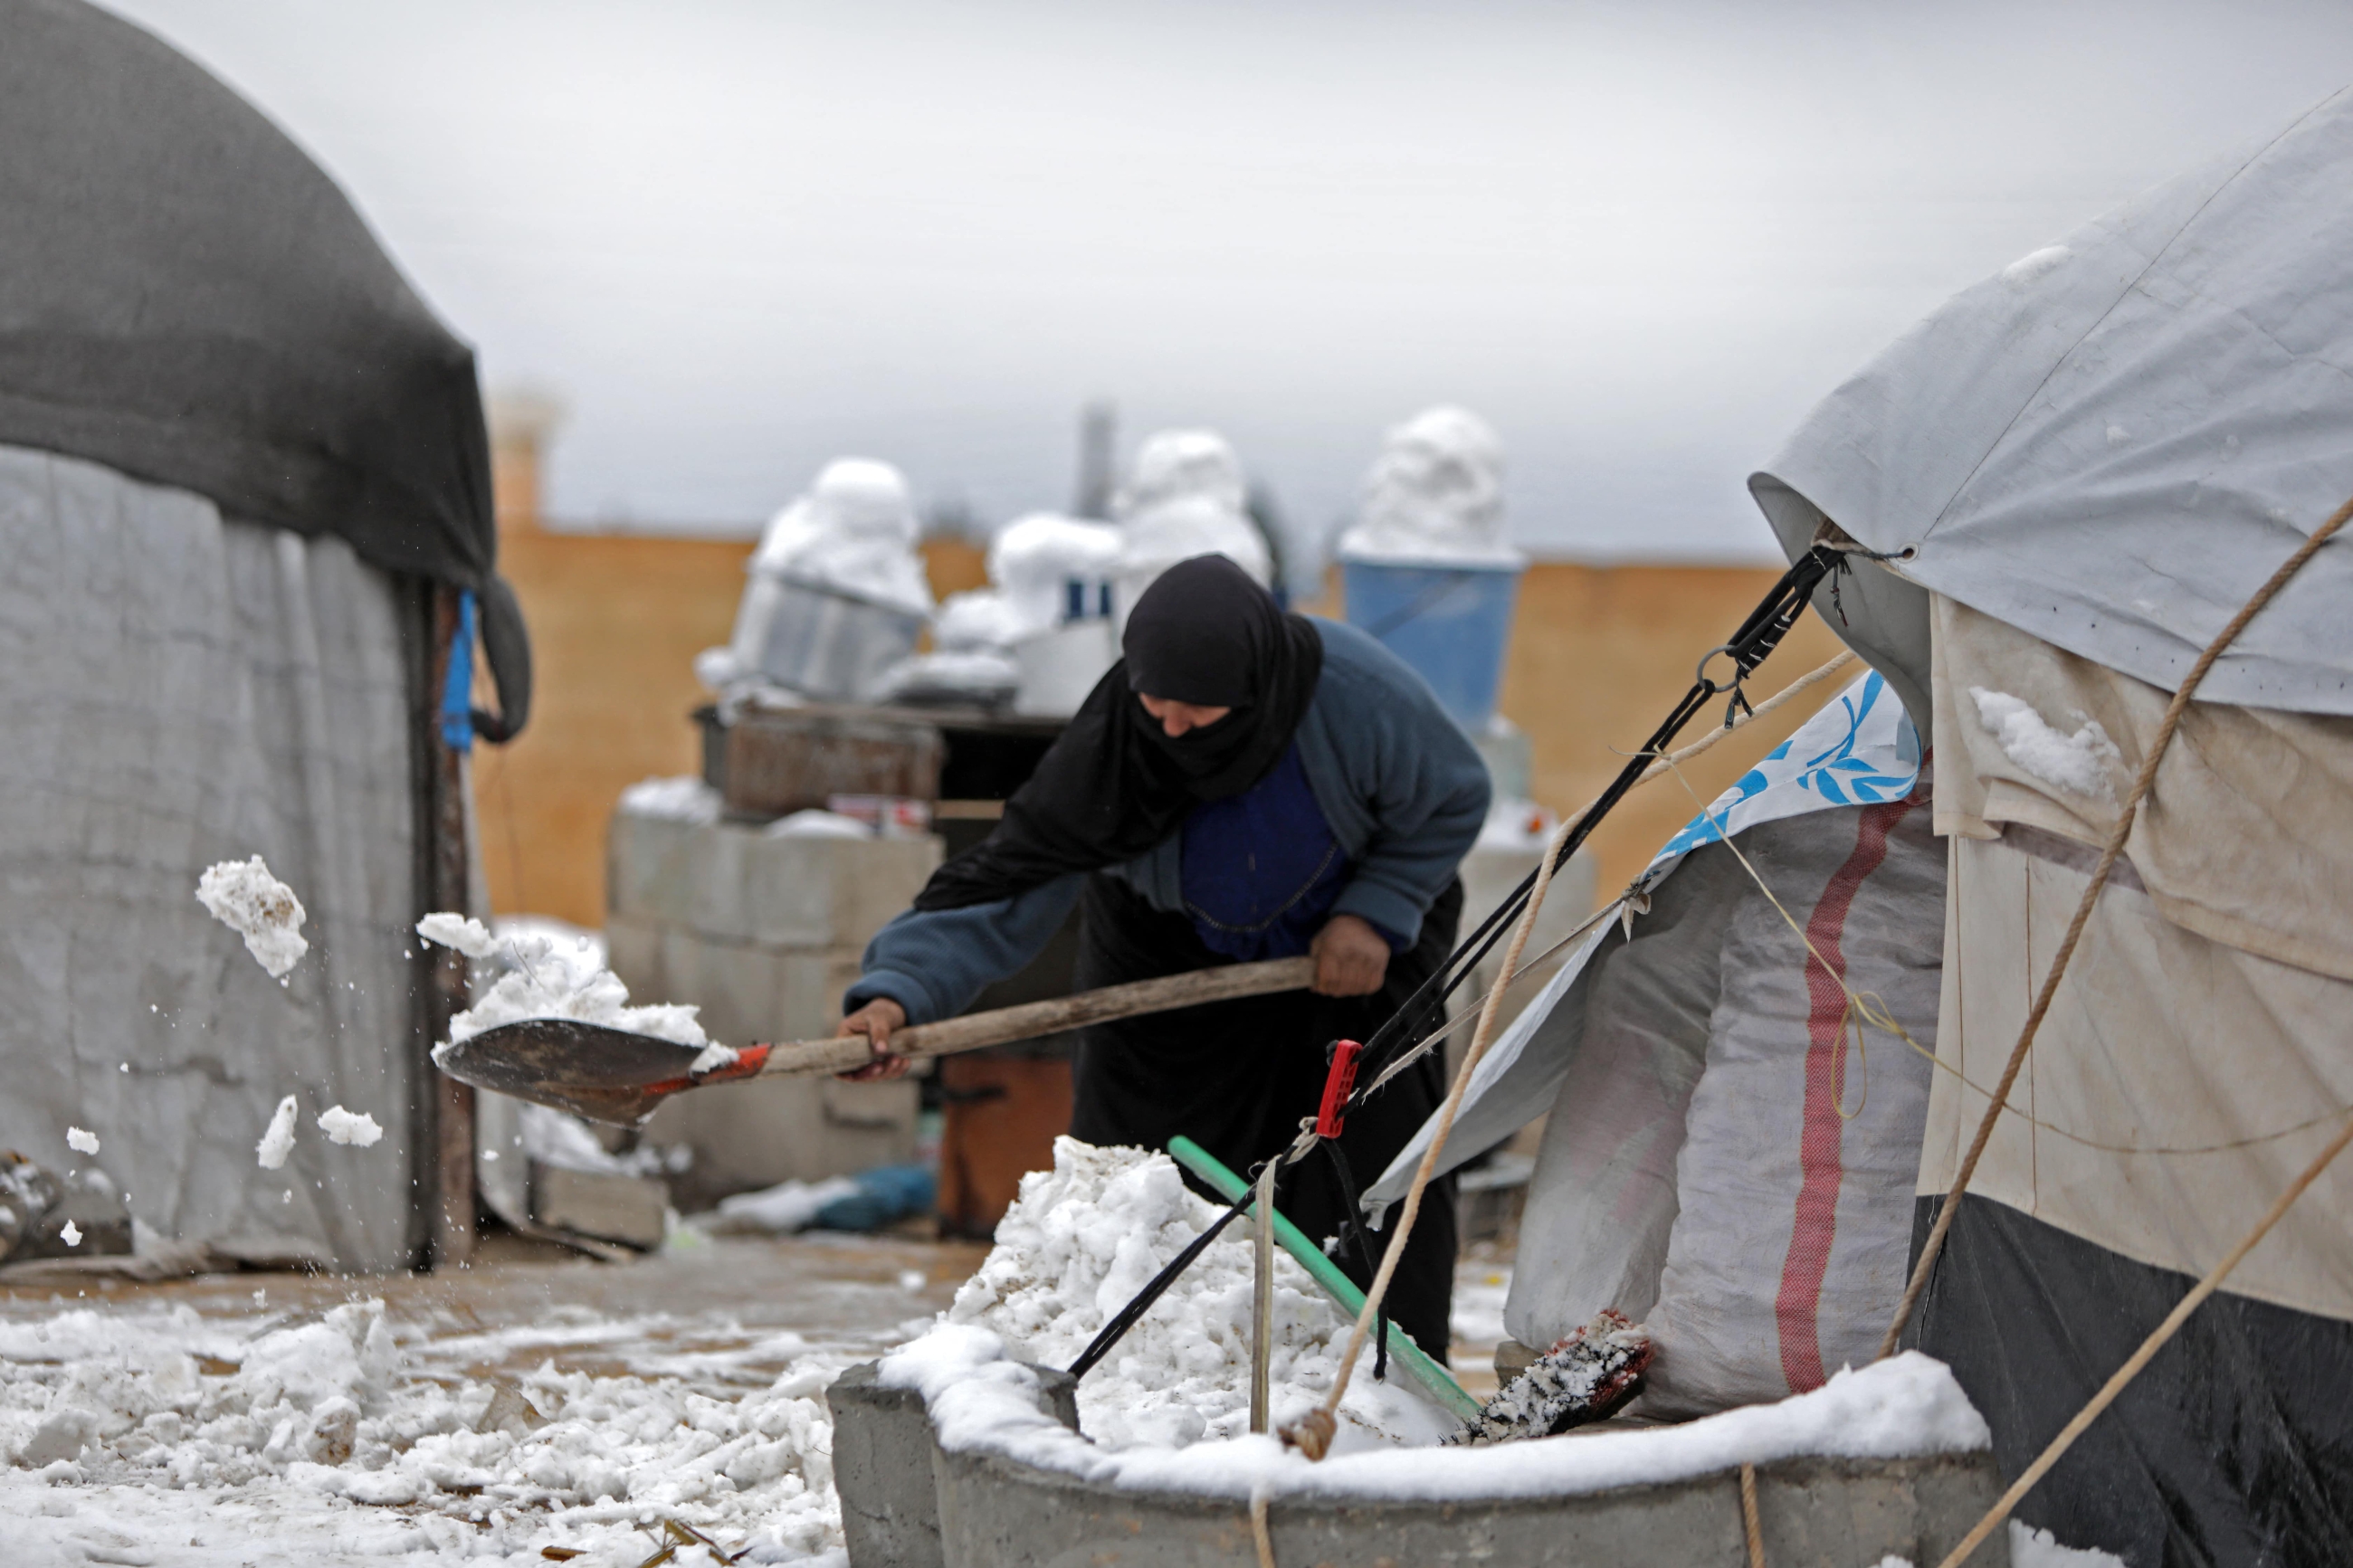 A woman who fled pro-regime forces attacks in northeastern Syria, clears the snow in front of a tent at camp for displaced people in the northern Syrian town of Tal Abyad by the border with Turkey, on February 13, 2020. (Bakr ALKASEM/AFP)